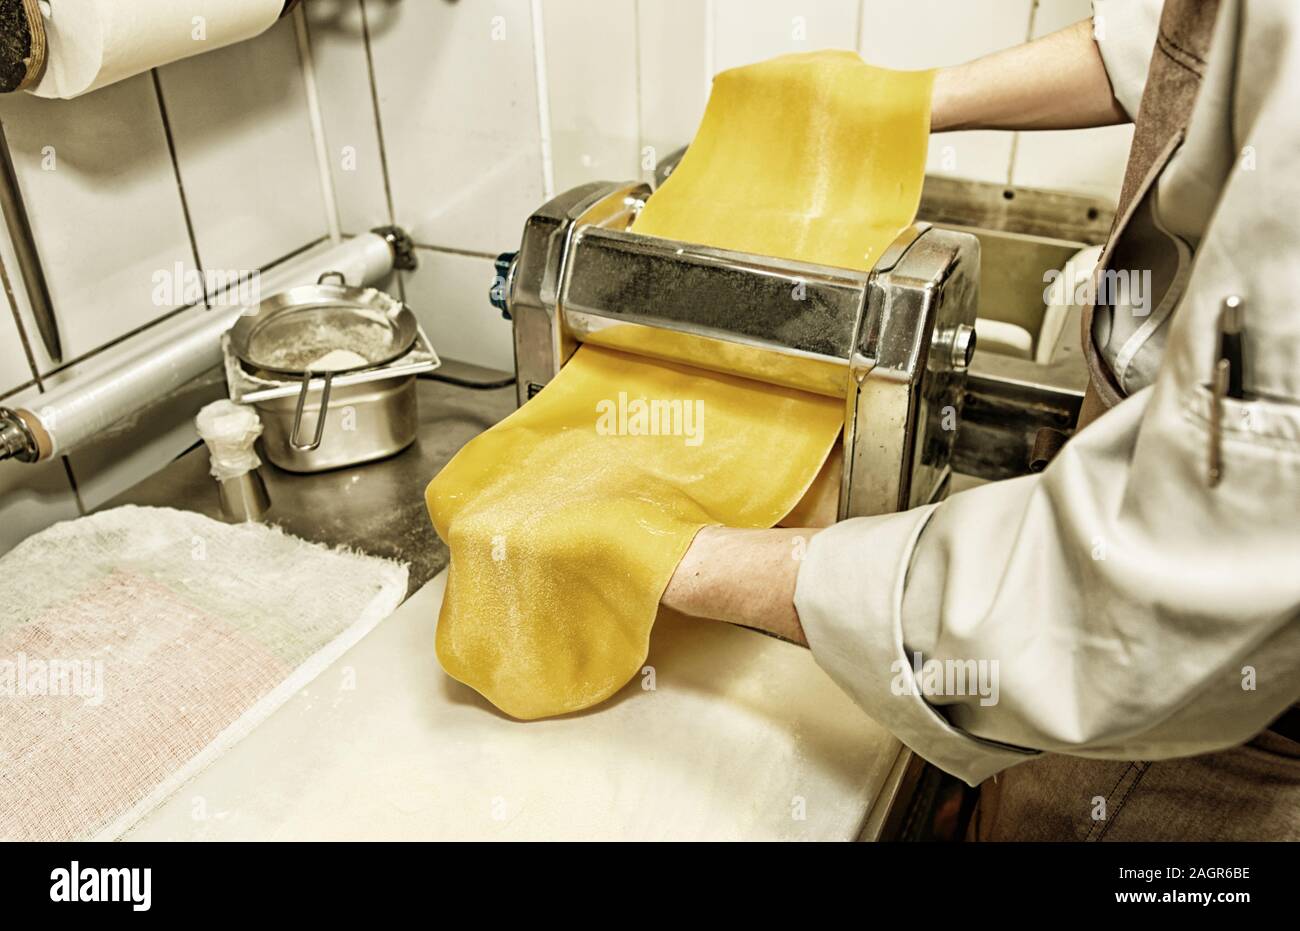 Chef is making thin dough with special machine, toned image Stock Photo